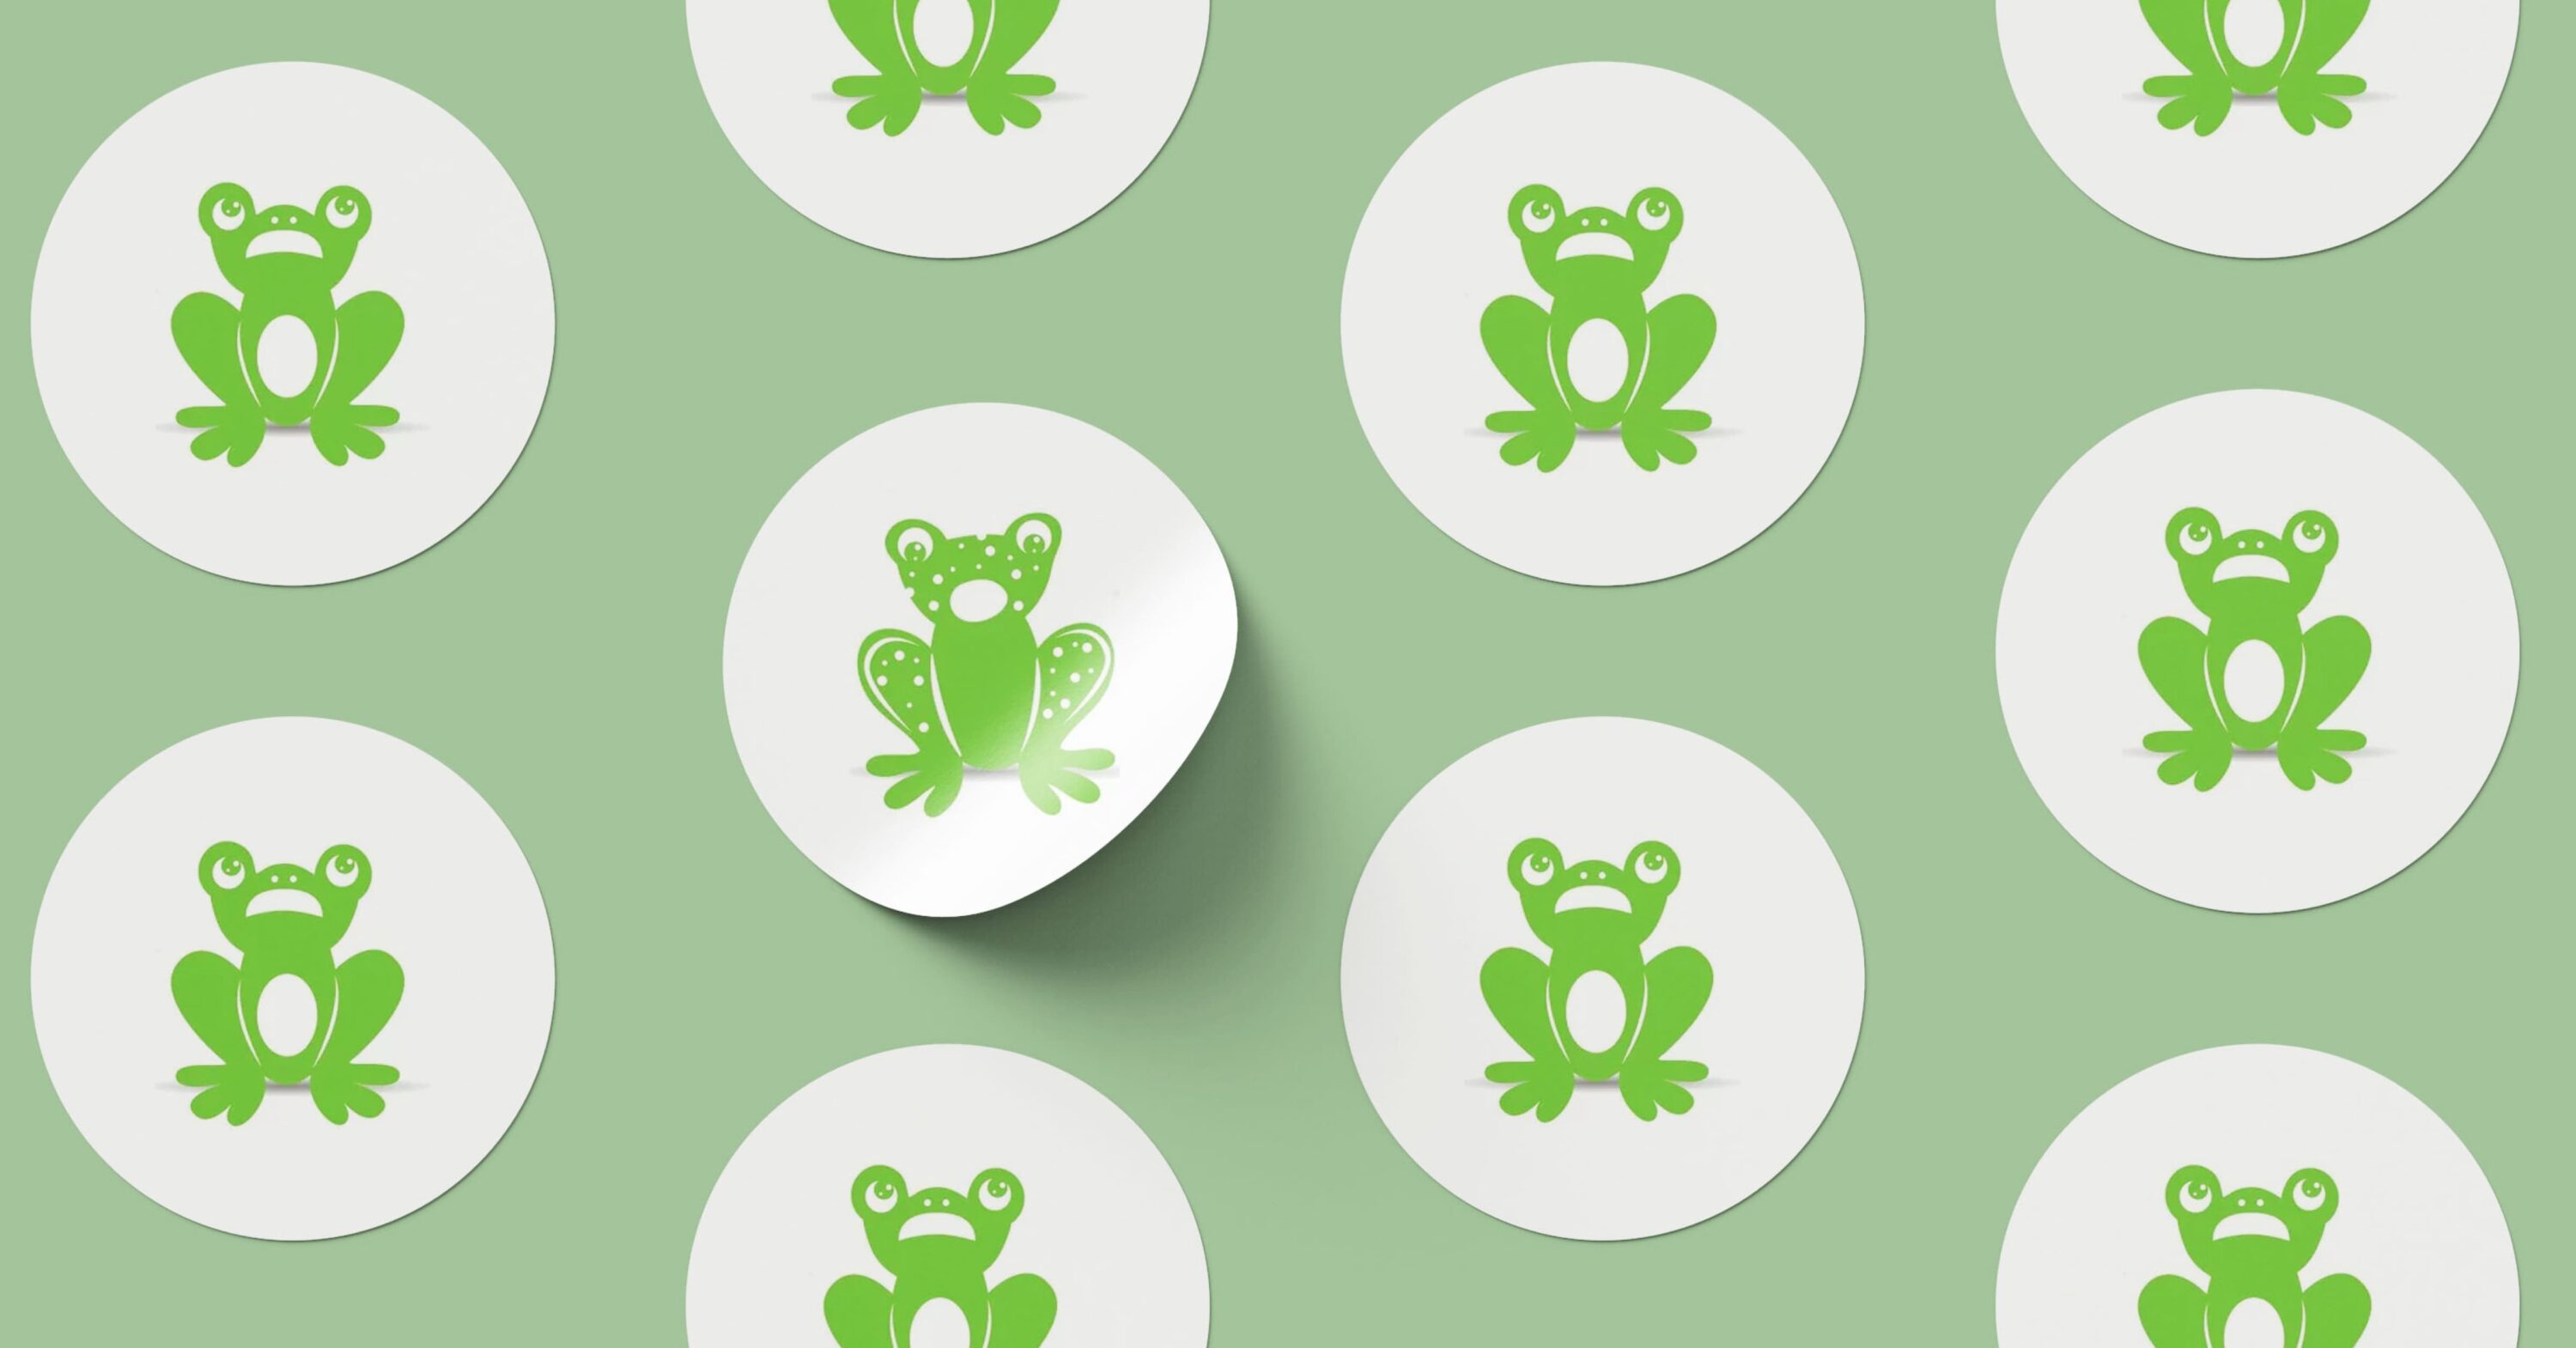 Diverse of frog graphic elements.